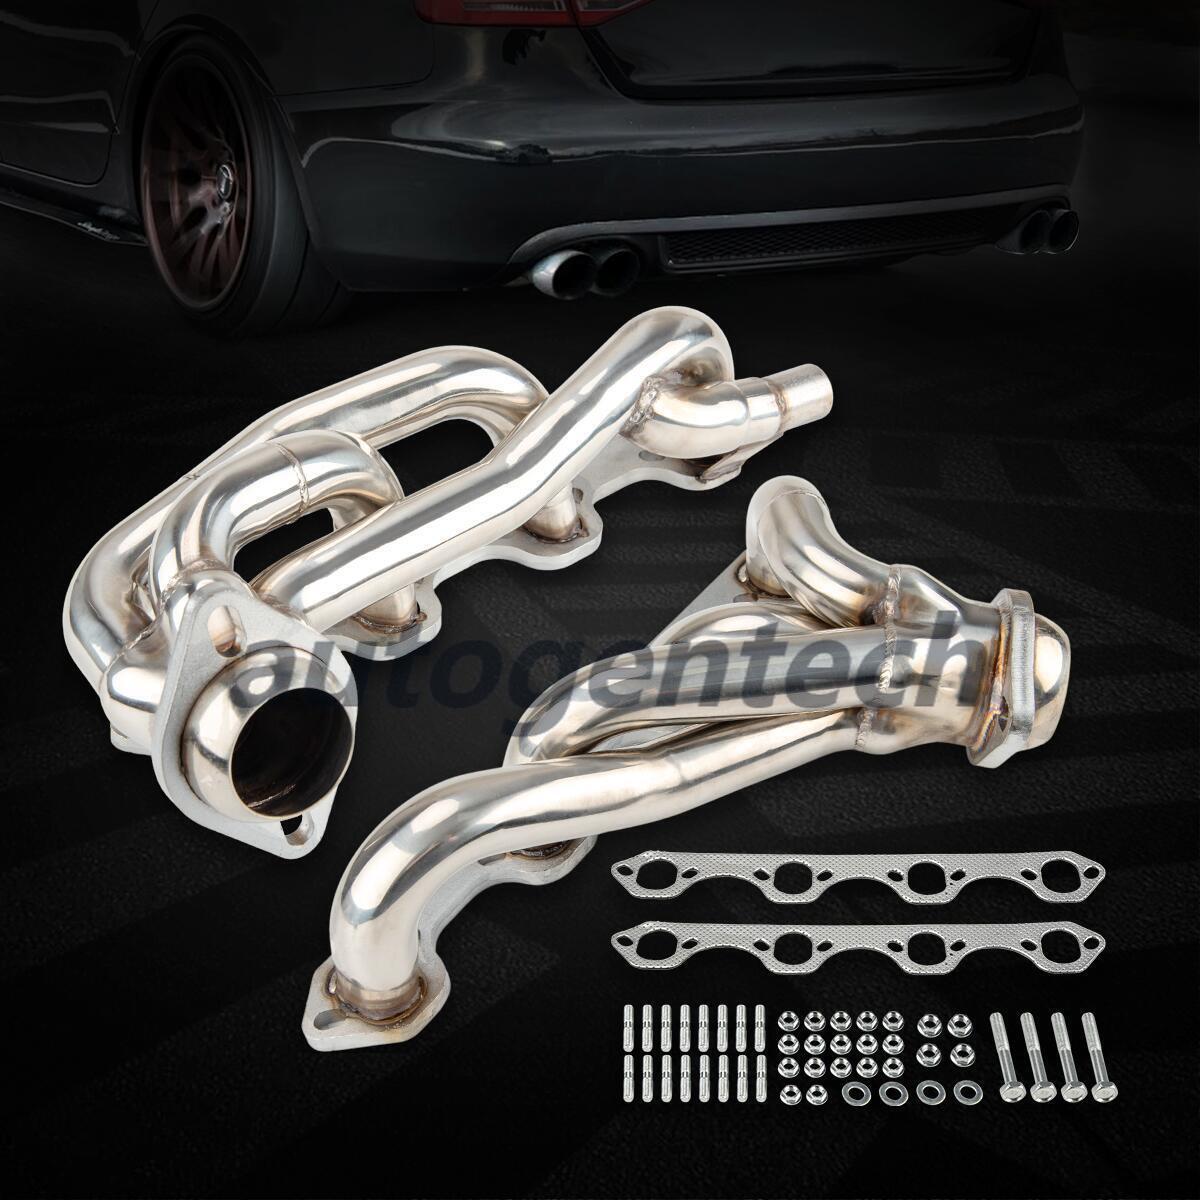 T-304 Shorty Exhaust Headers For 87-96 Ford F150/F250/Bronco 5.8L V8